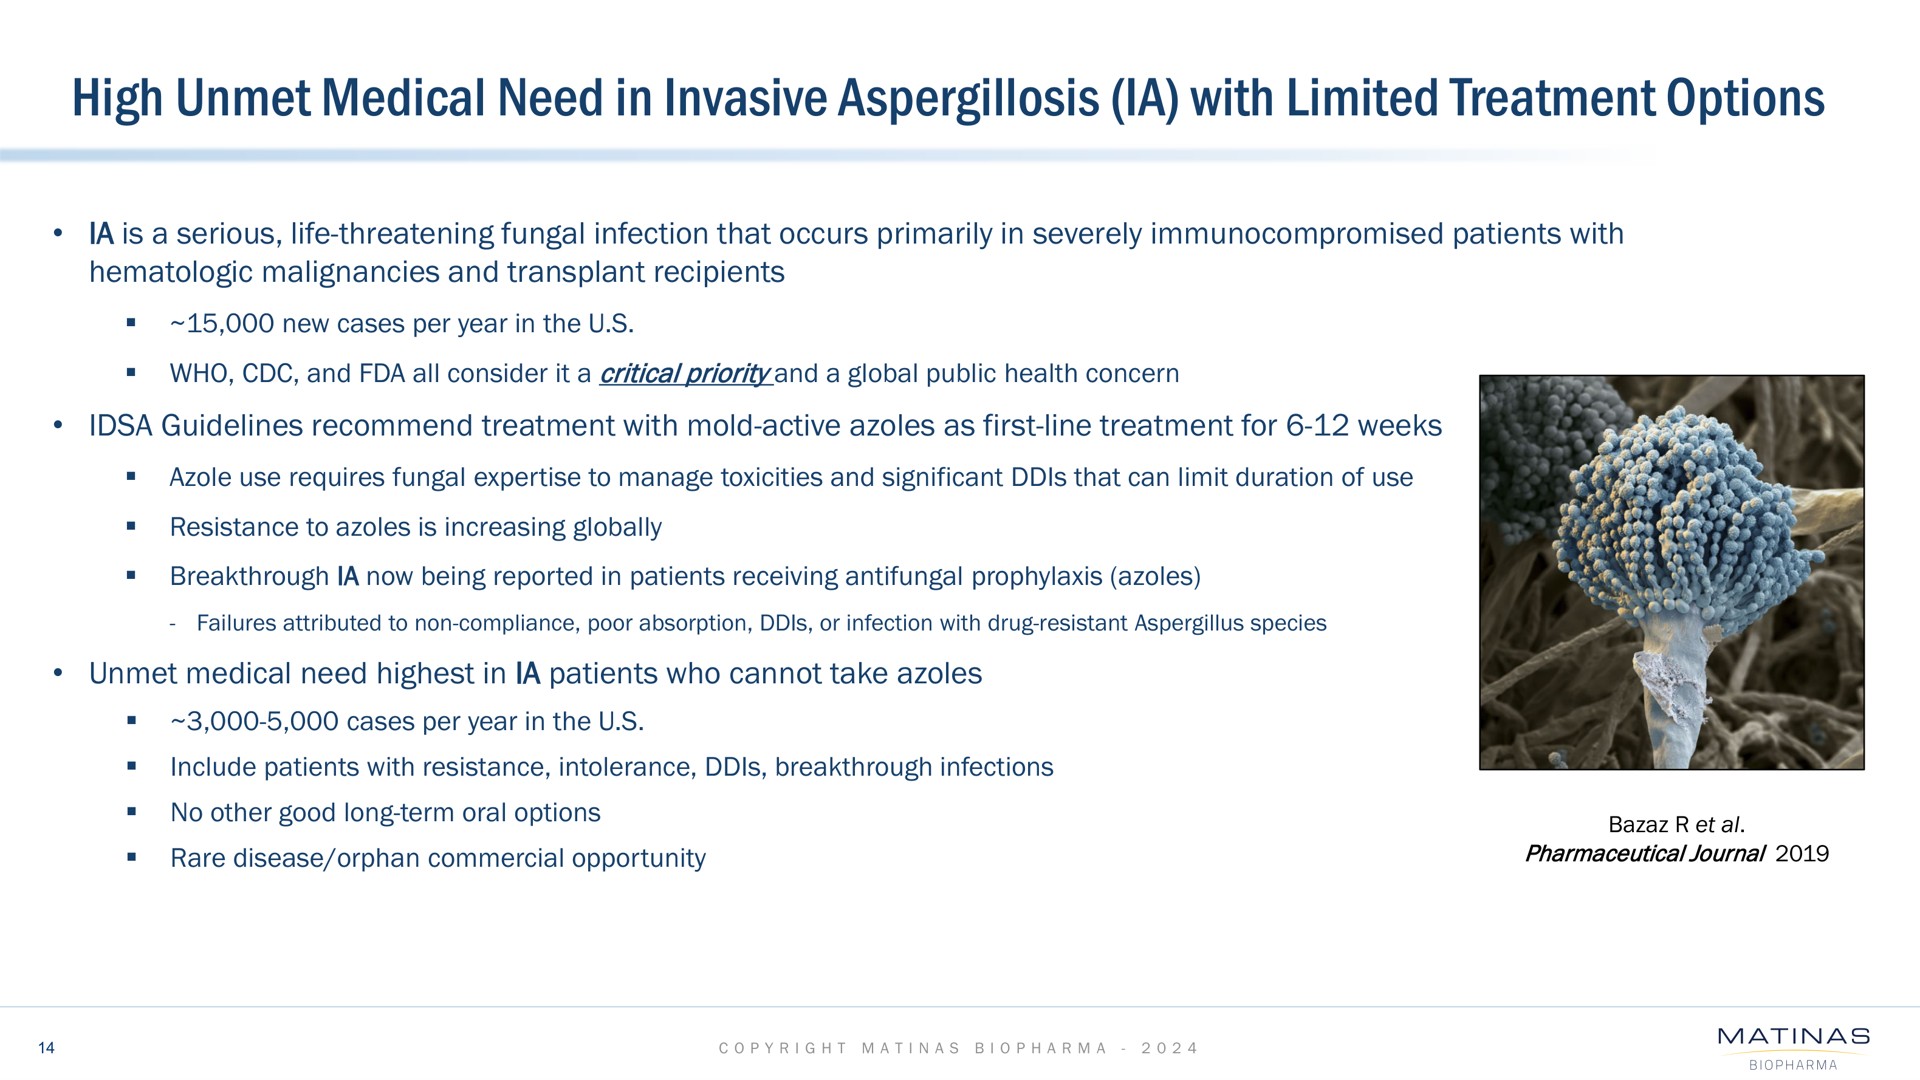 high unmet medical need in invasive aspergillosis with limited treatment options | Matinas BioPharma